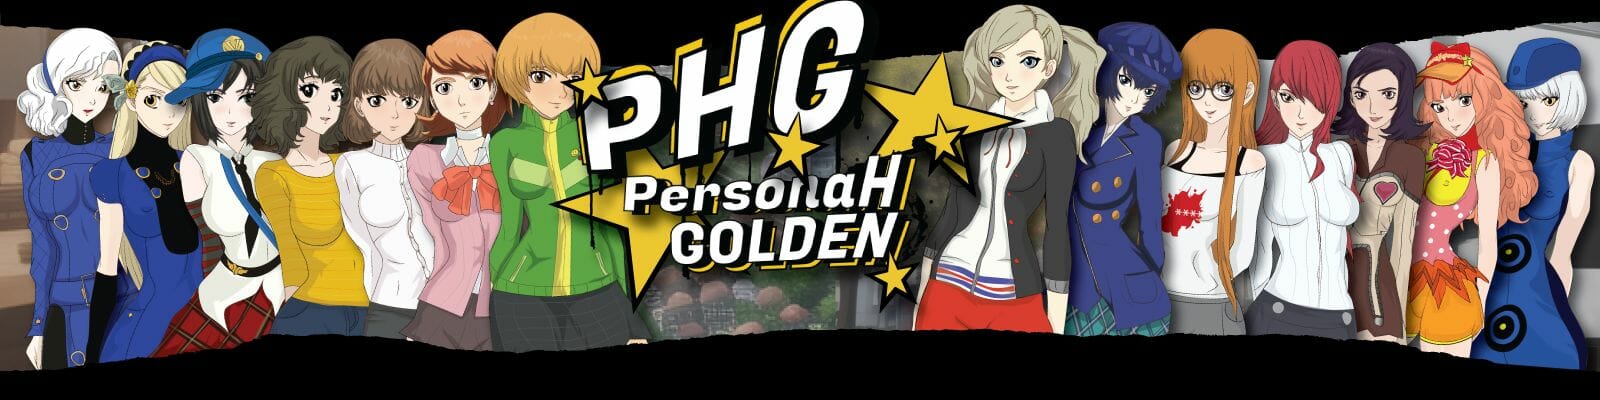 Persona H Golden Adult Game Android Download (2)